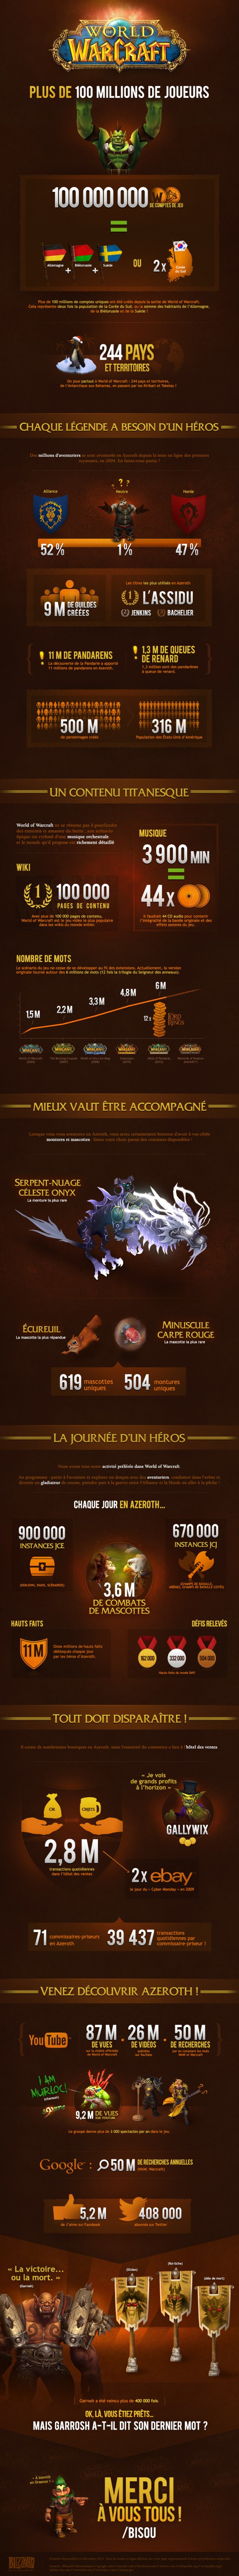 WoW_Infographic-2014_FR-600x6474